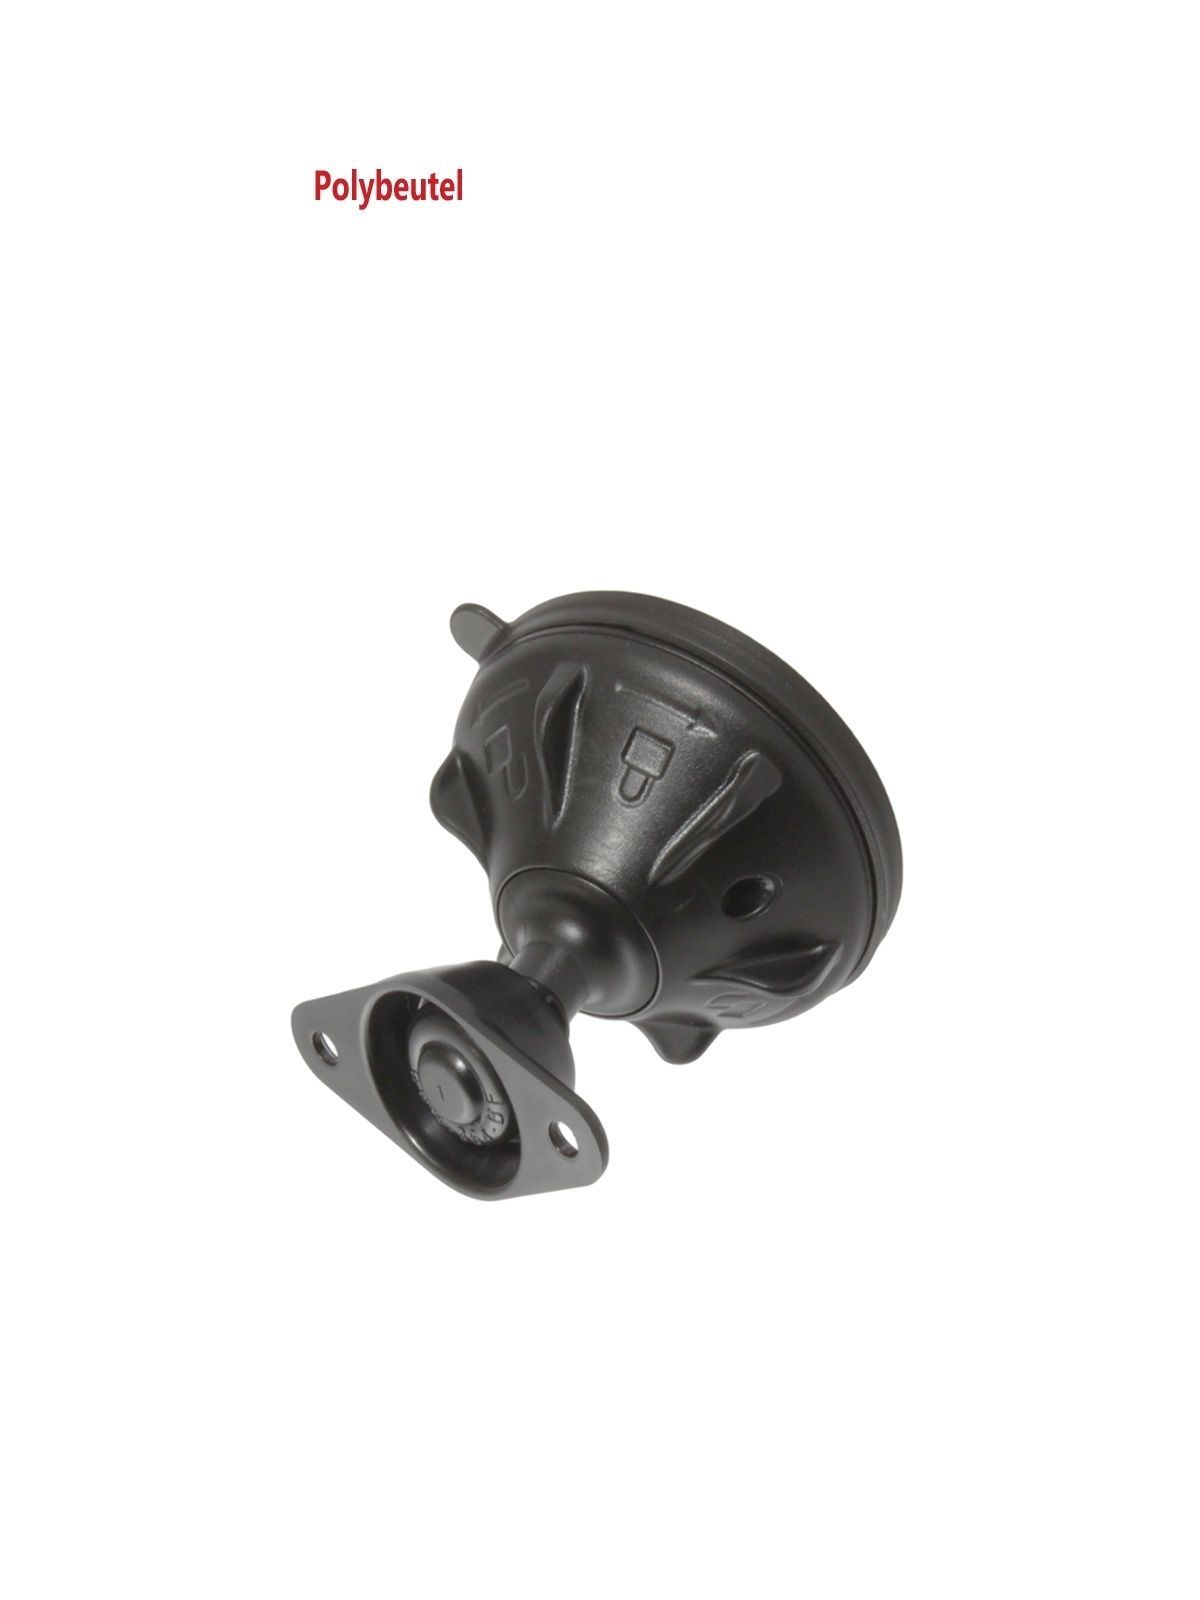 RAM MOUNTS Snap Link Suction Cup with Diamond Base